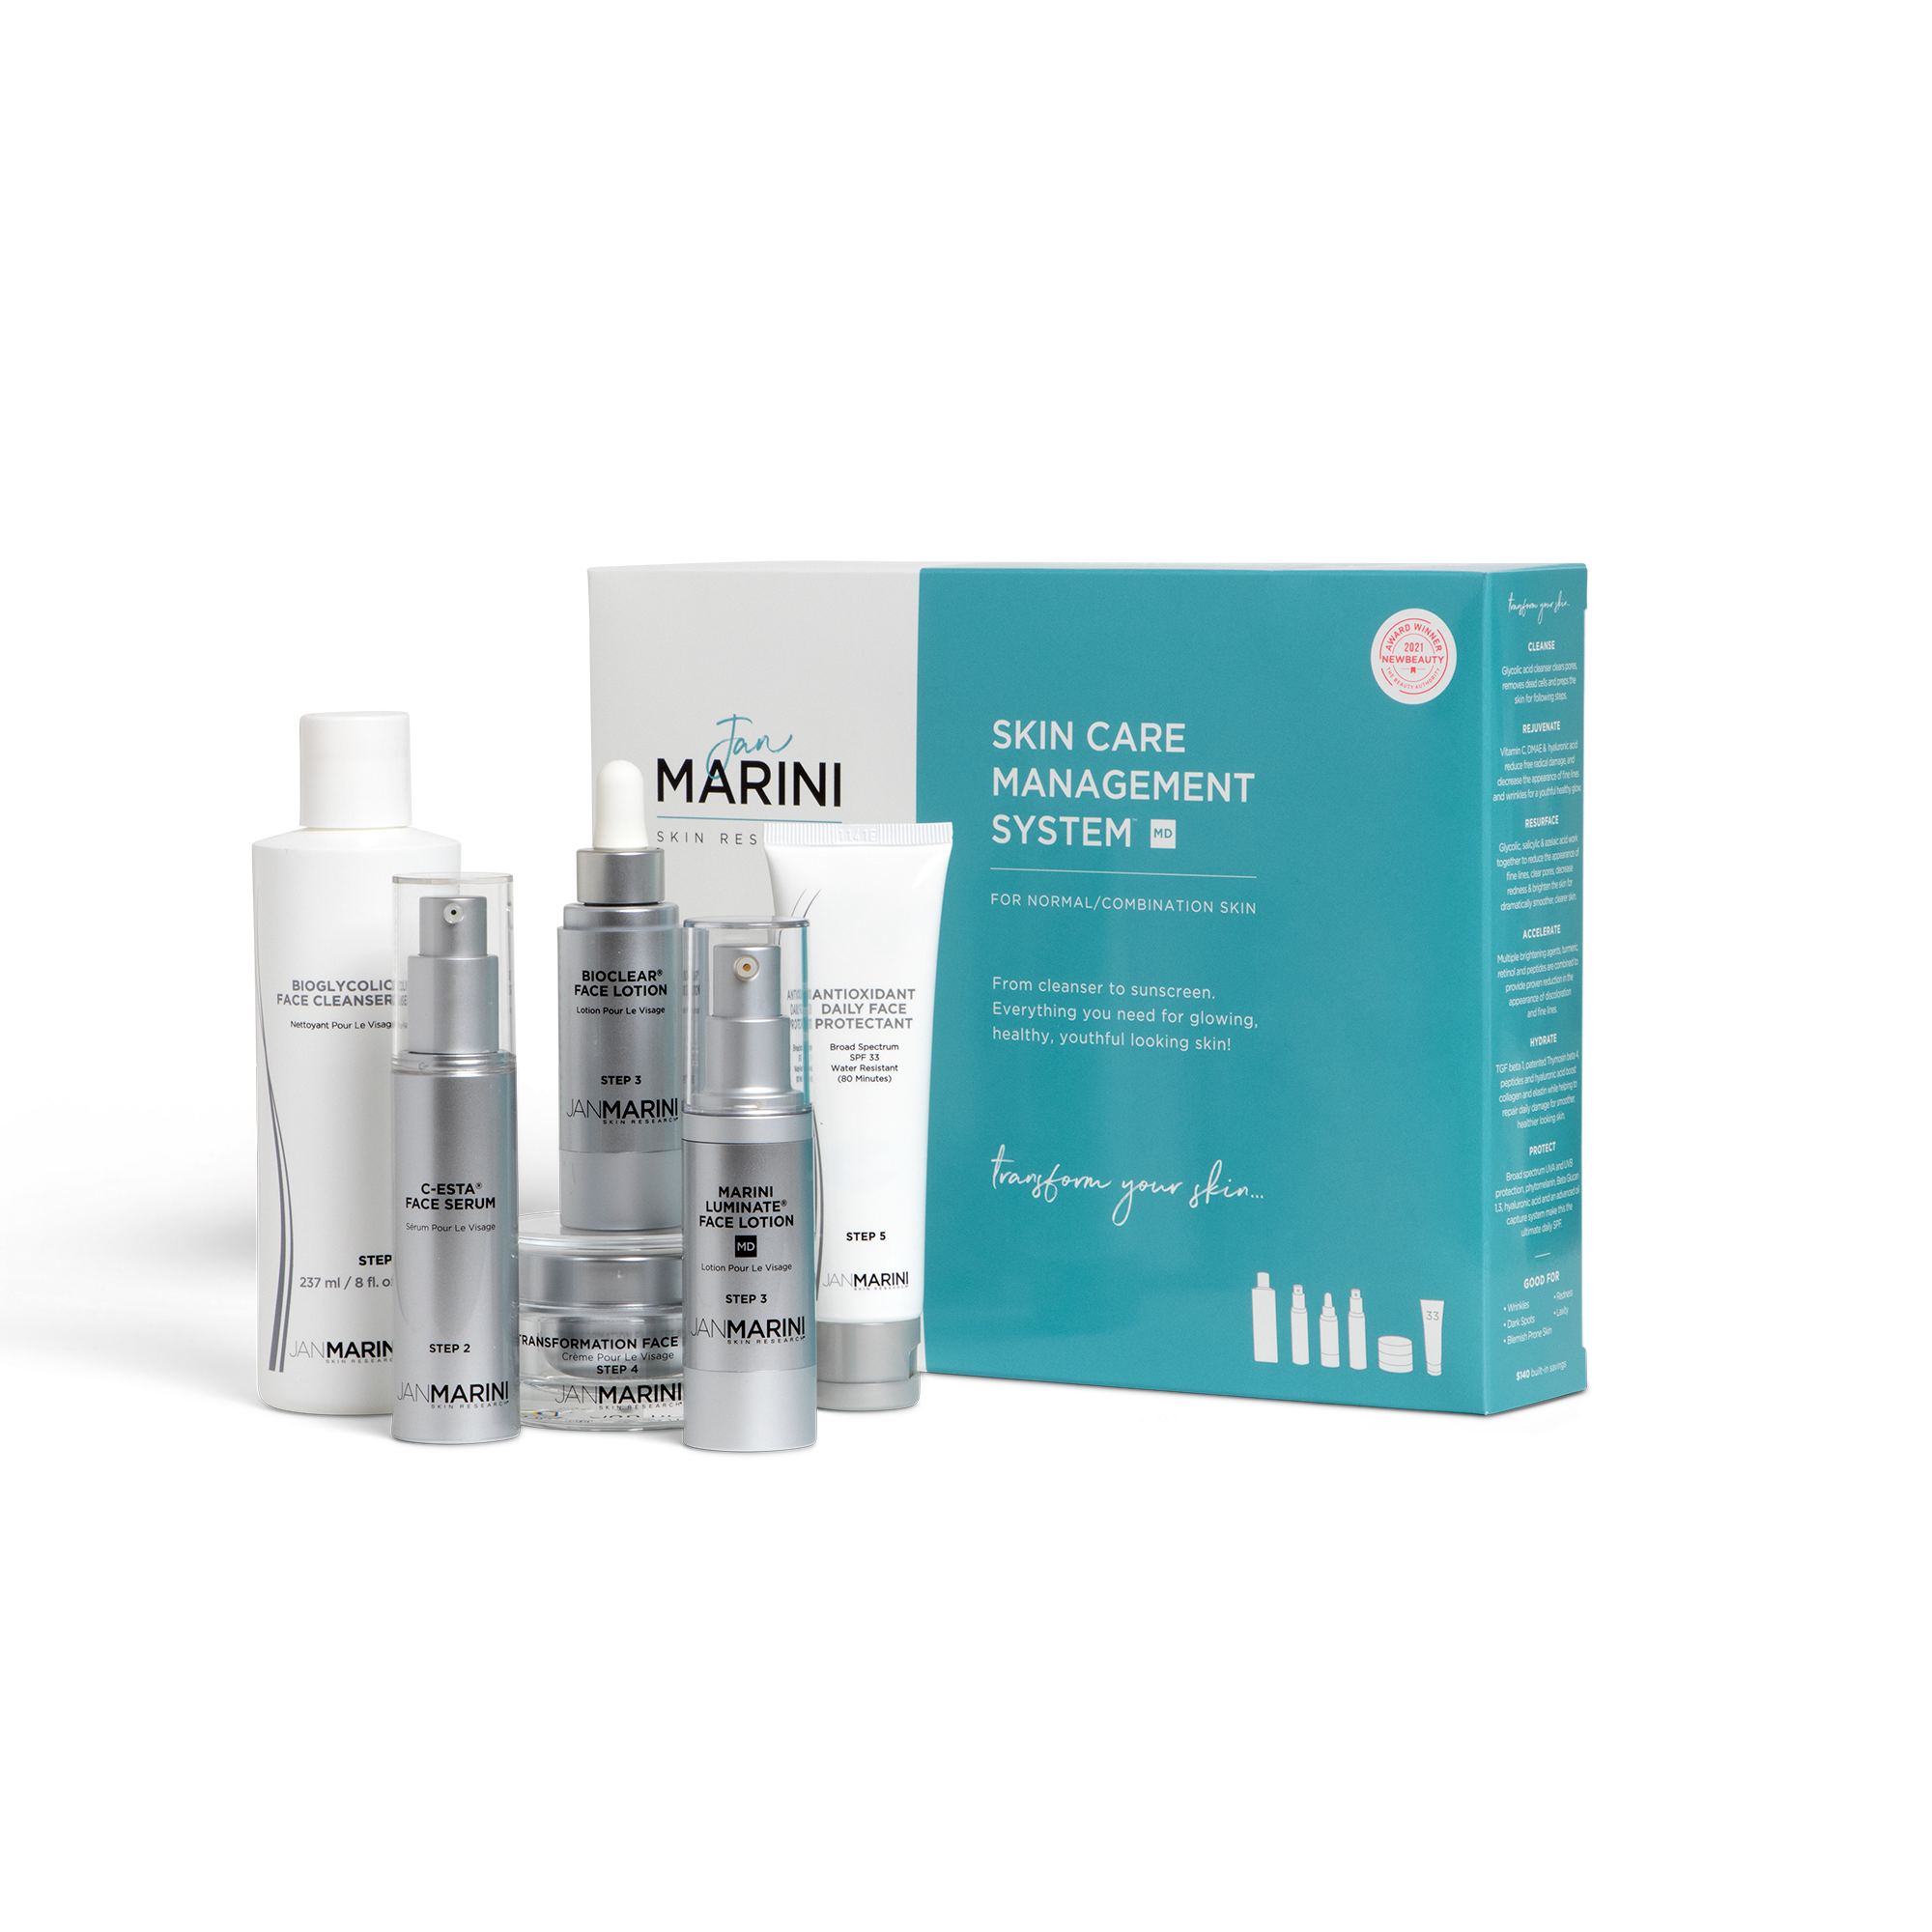 Jan Marini A Skin Care Management System - MD Normal/Combo with Daily Face Protectant SPF 33